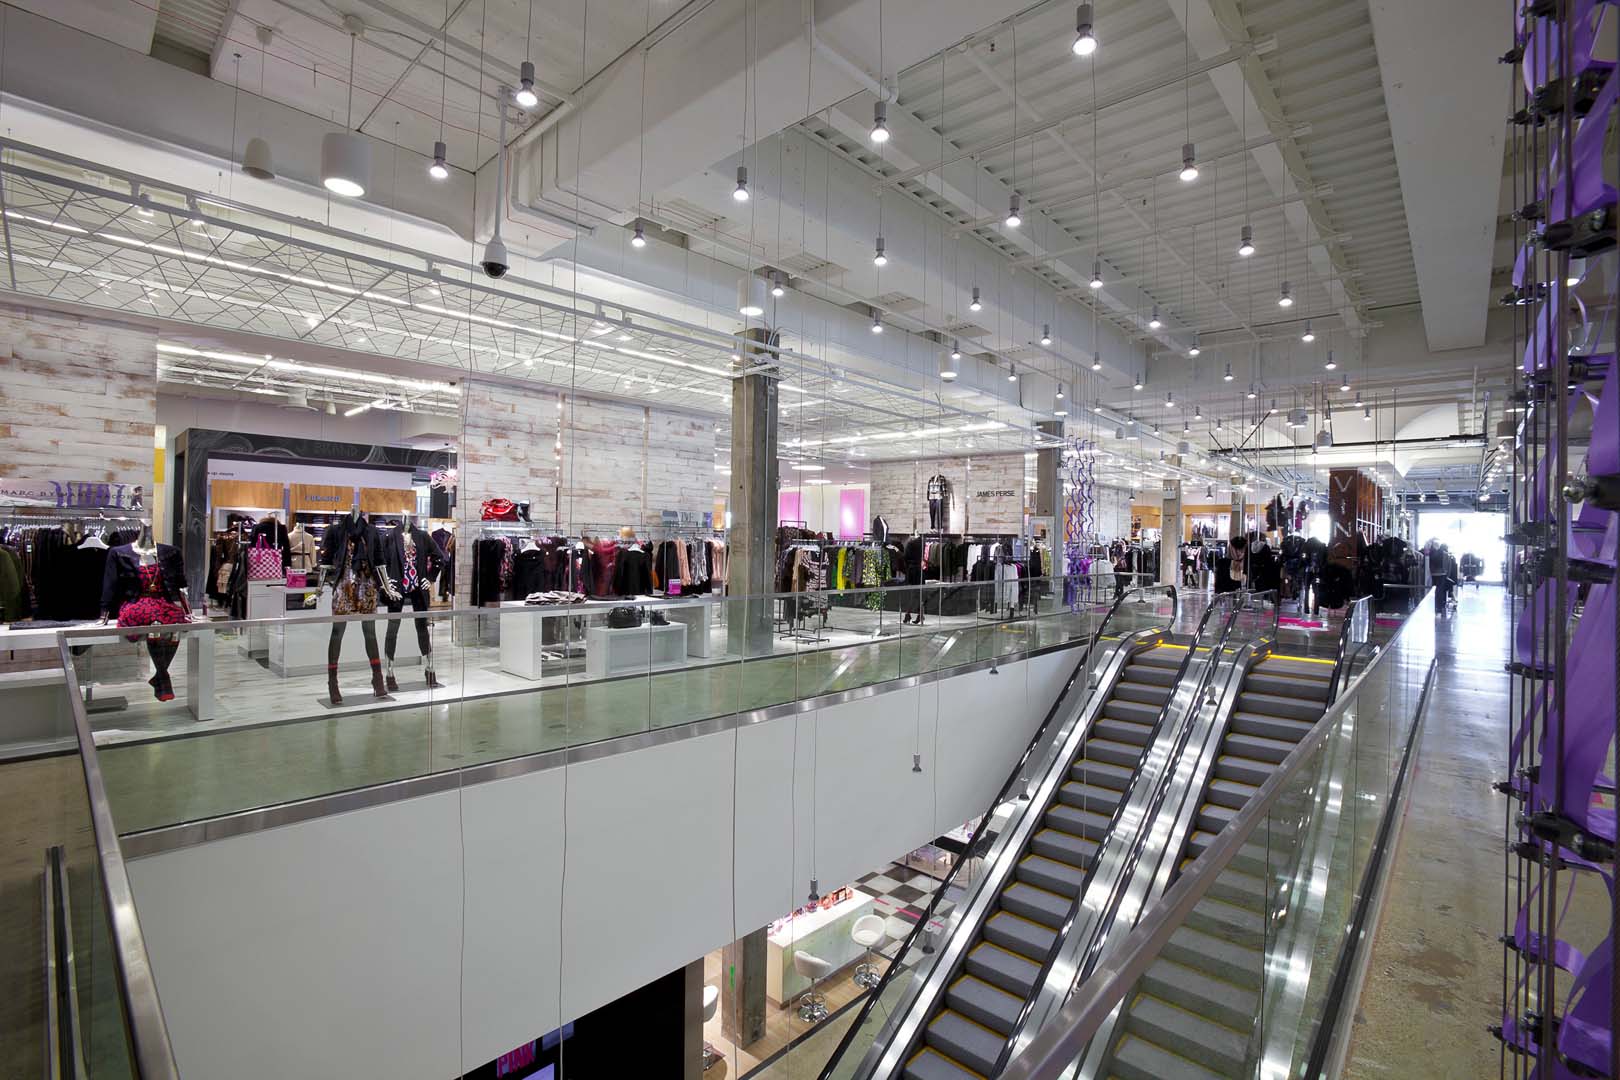 Macerich's New Santa Monica Place Opens With Bloomingdale's and 50+  Retailers and Restaurants